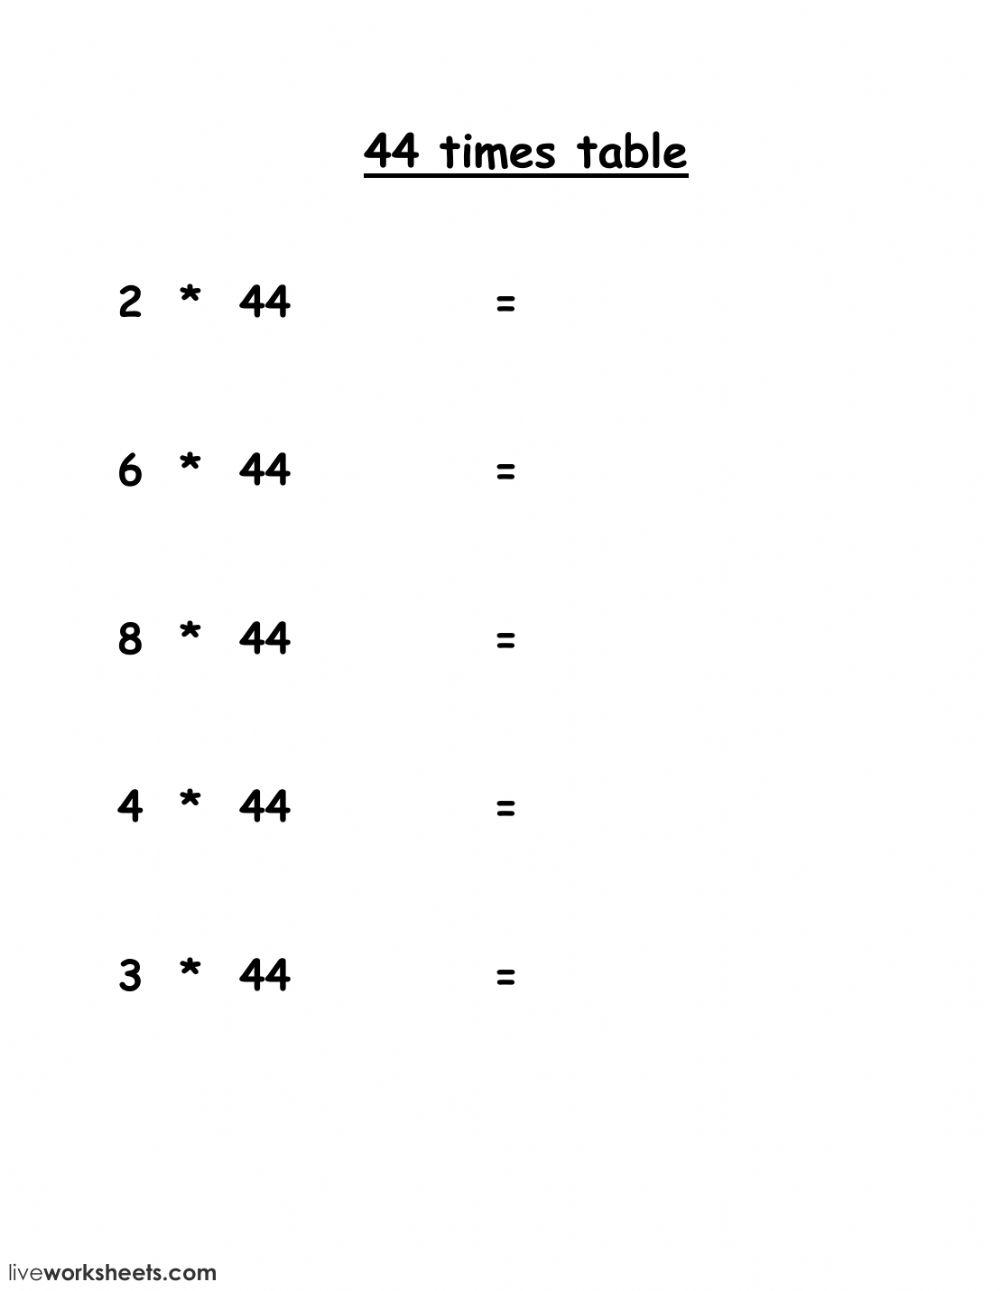 44 times table